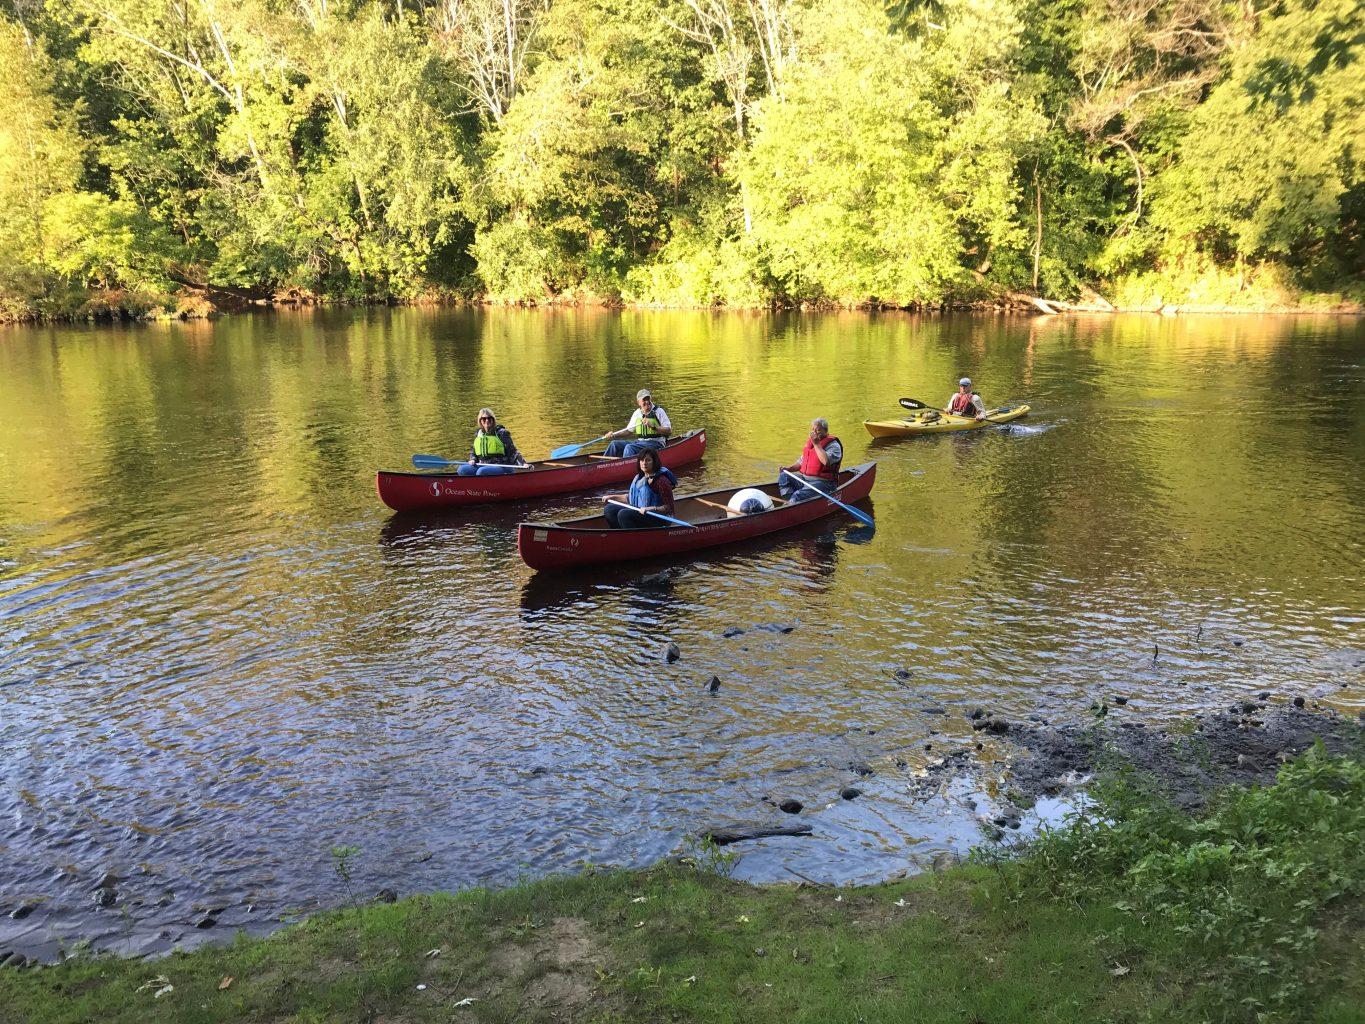 Blackstone River Watershed Council volunteers paddling on the river